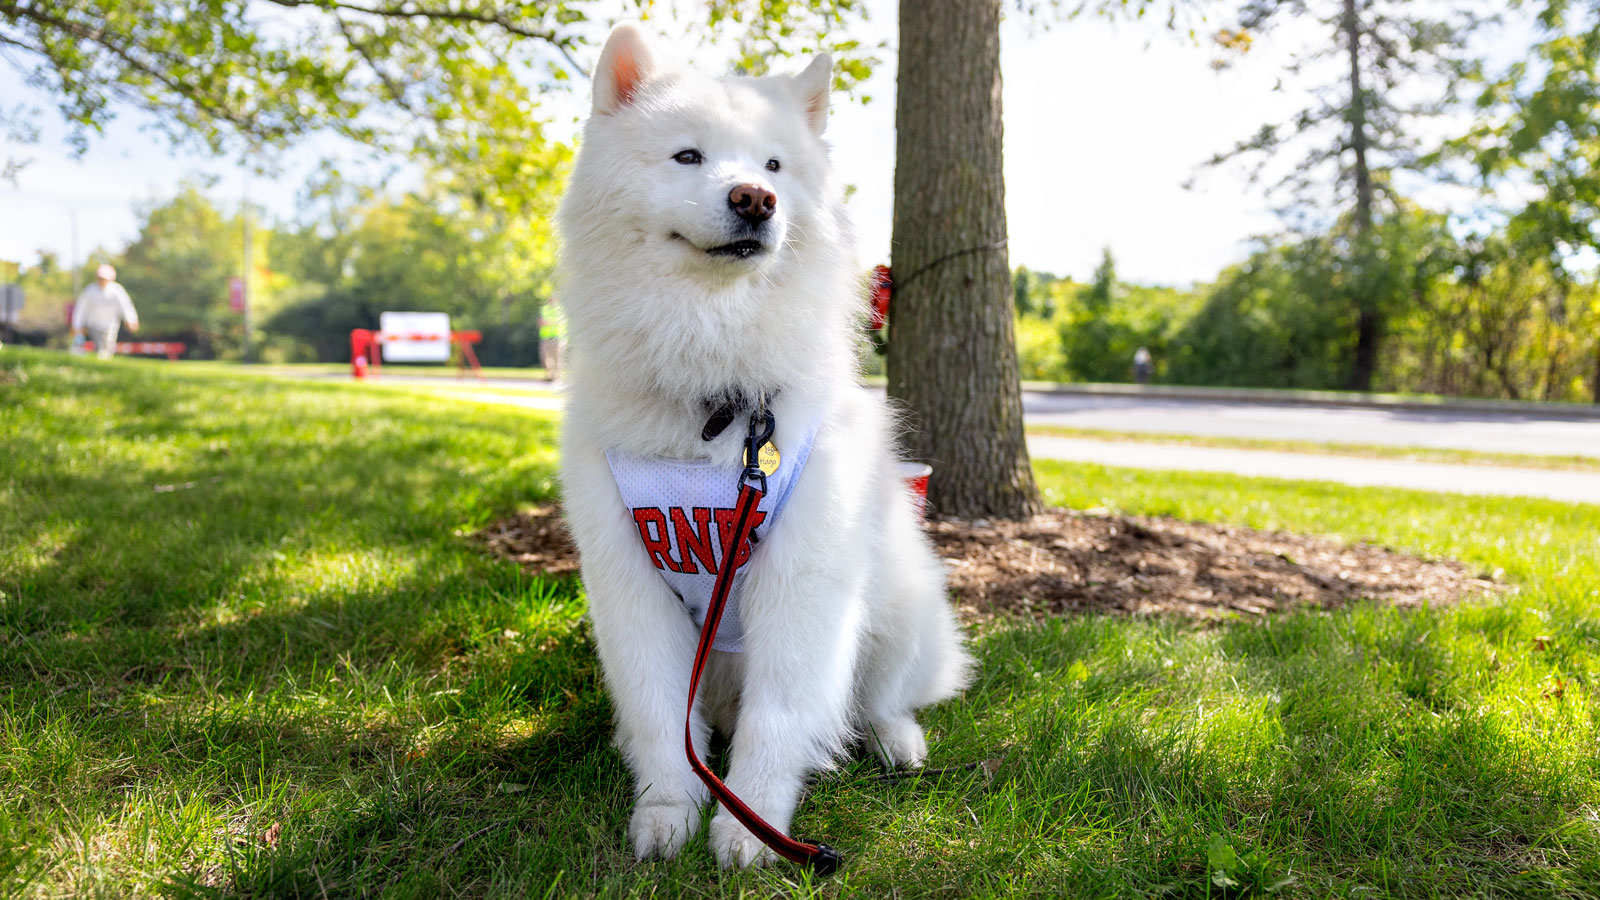 A four-legged Cornellian enjoys a quiet moment on campus during Homecoming Weekend